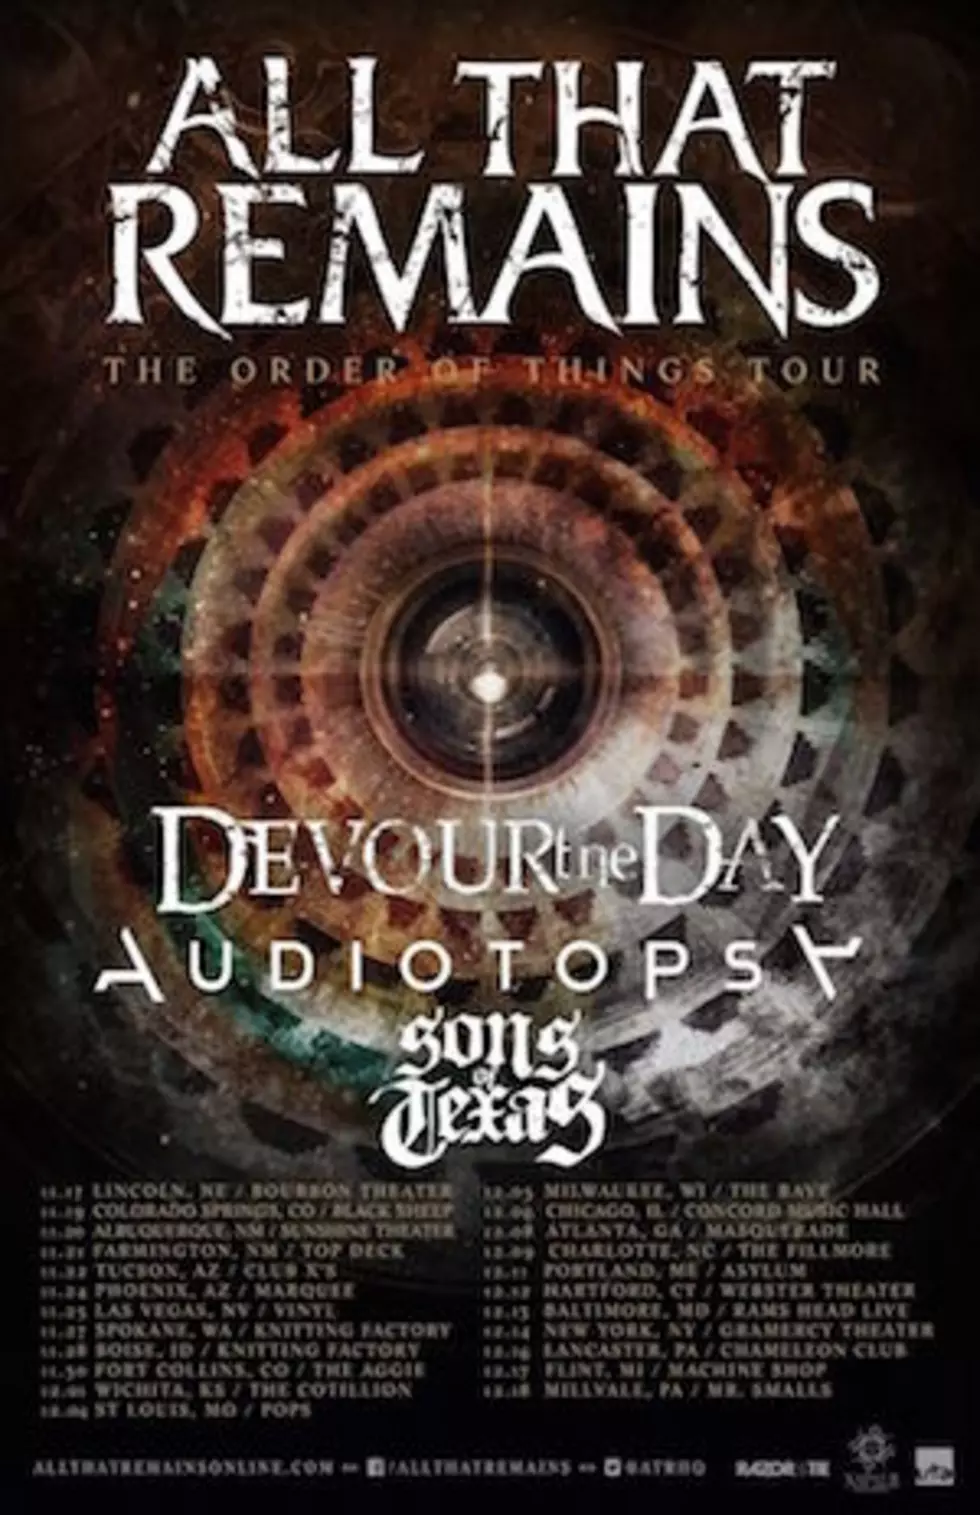 All That Remains Announce Tour With Devour the Day, Audiotopsy + Sons of Texas